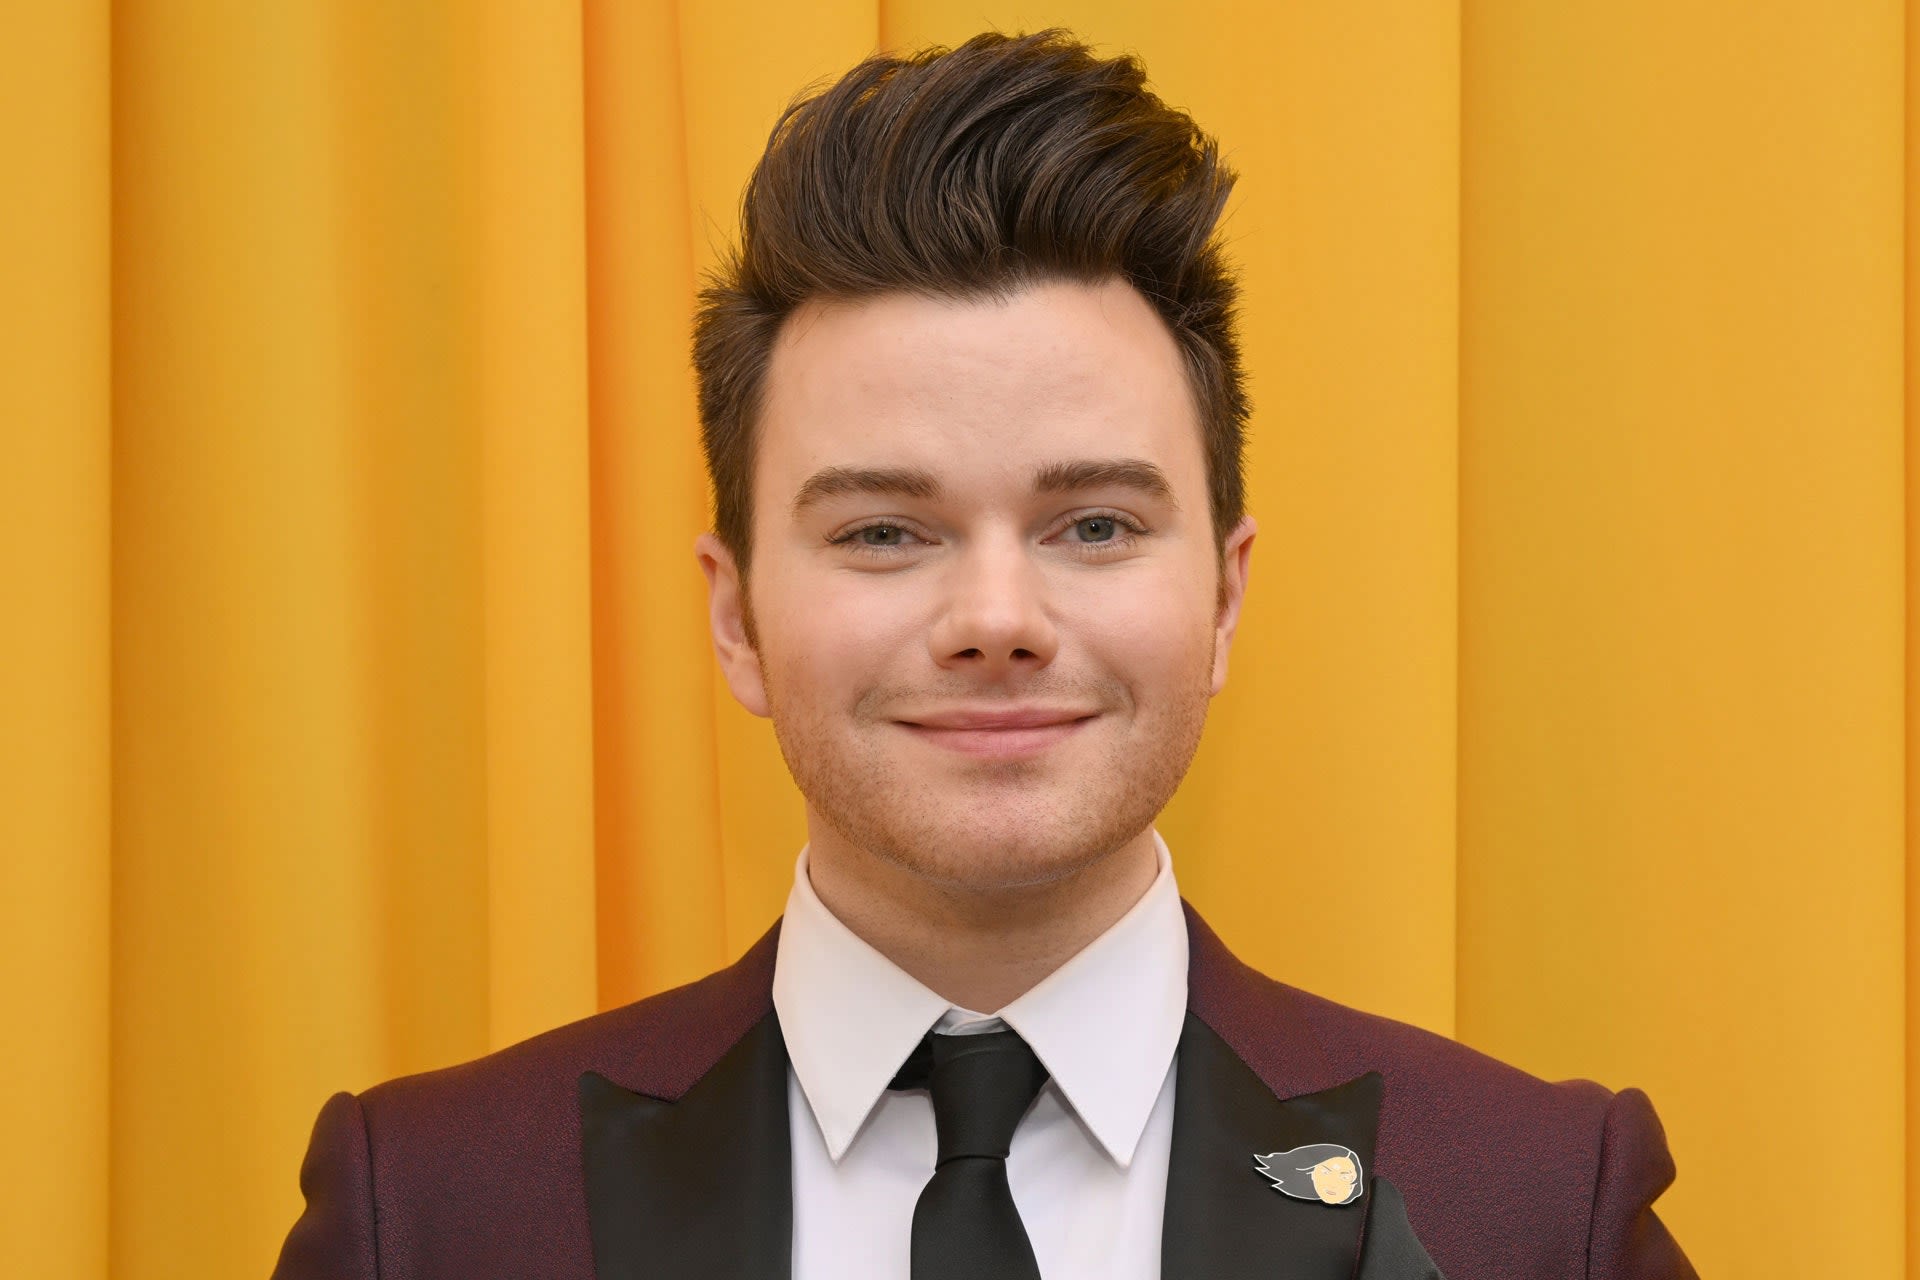 Glee Star Chris Colfer Says He Was Told Coming Out Would “Ruin” His Career